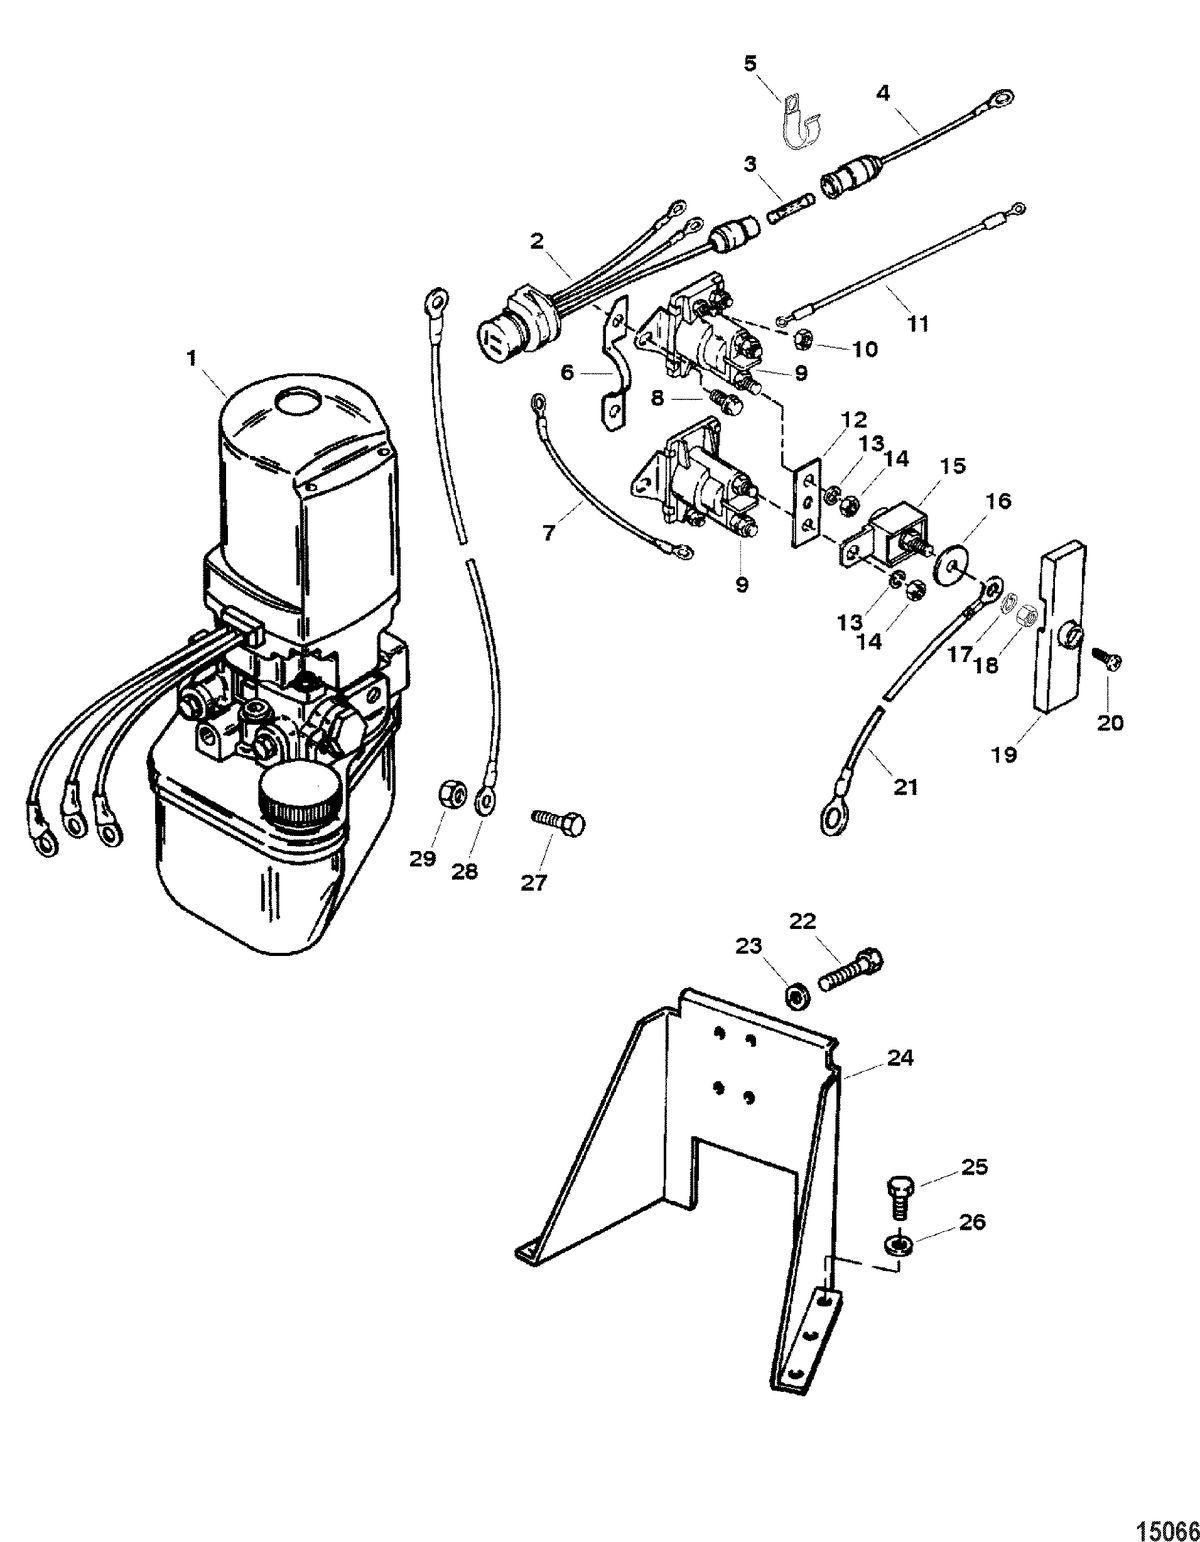 ACCESSORIES TRIM / TILT / LIFT SYSTEMS AND COMPONENTS Power Trim Kit(76509A27) (Page 1 Of 2)